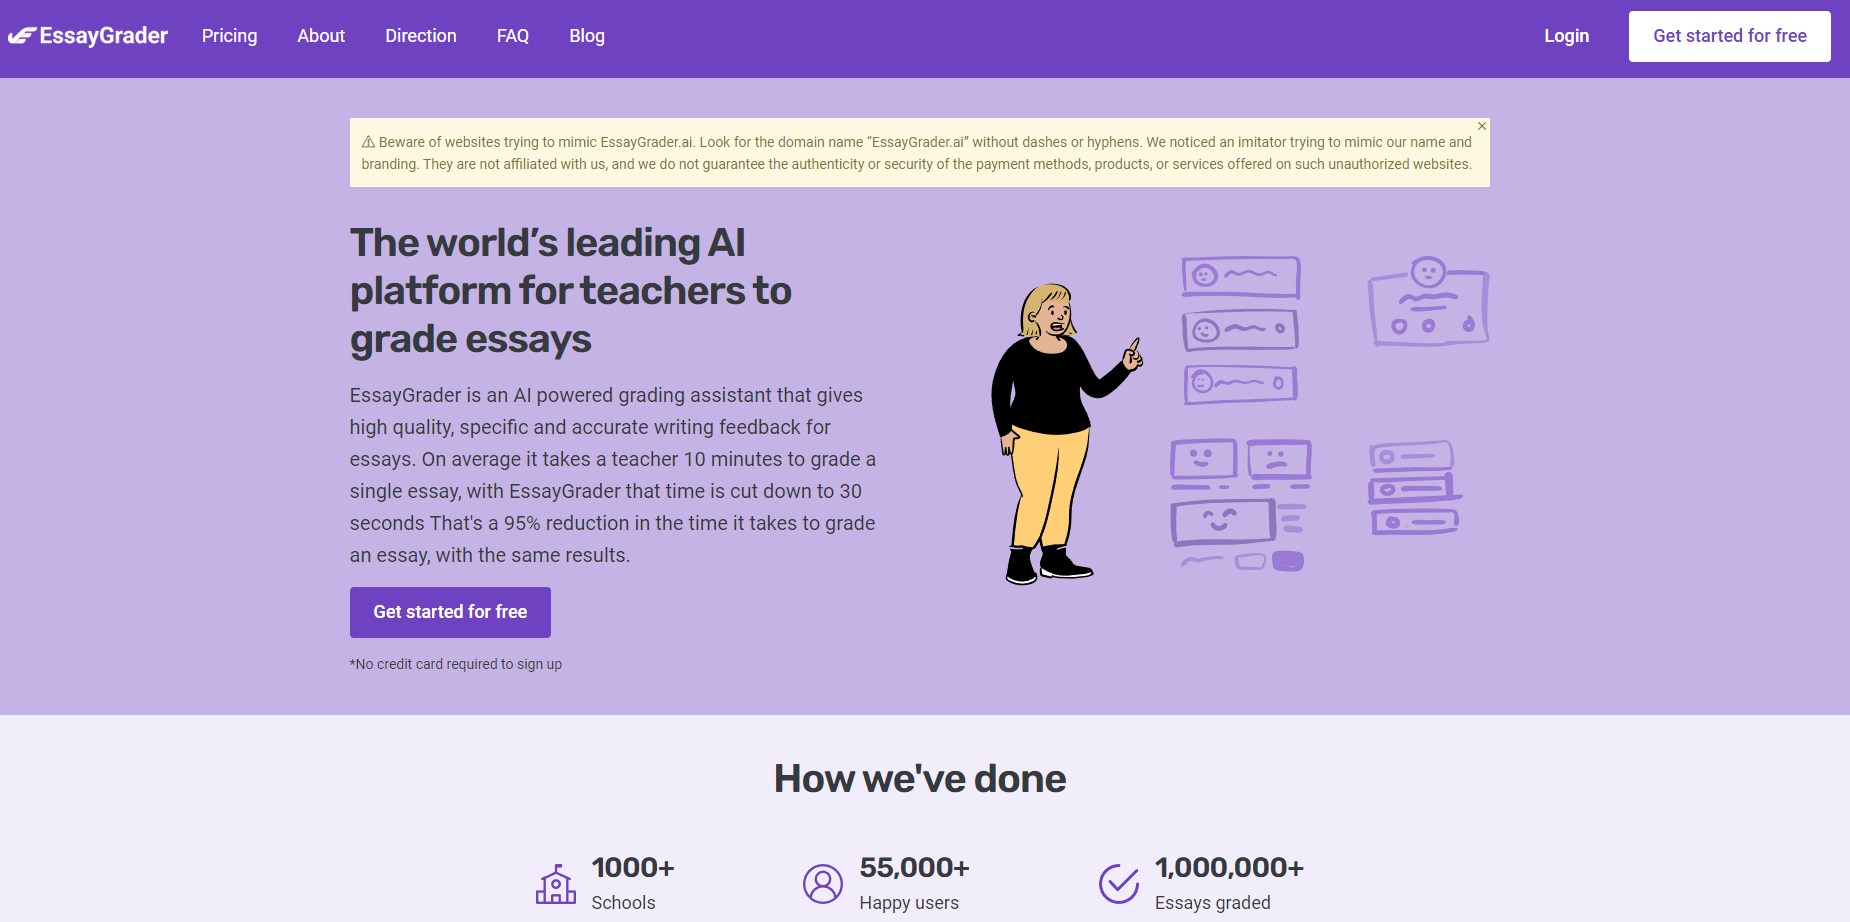 Easy GraderAI is an AI-powered grading tool that automates the evaluation of assessments, saving teachers time and providing consistent and unbiased grading